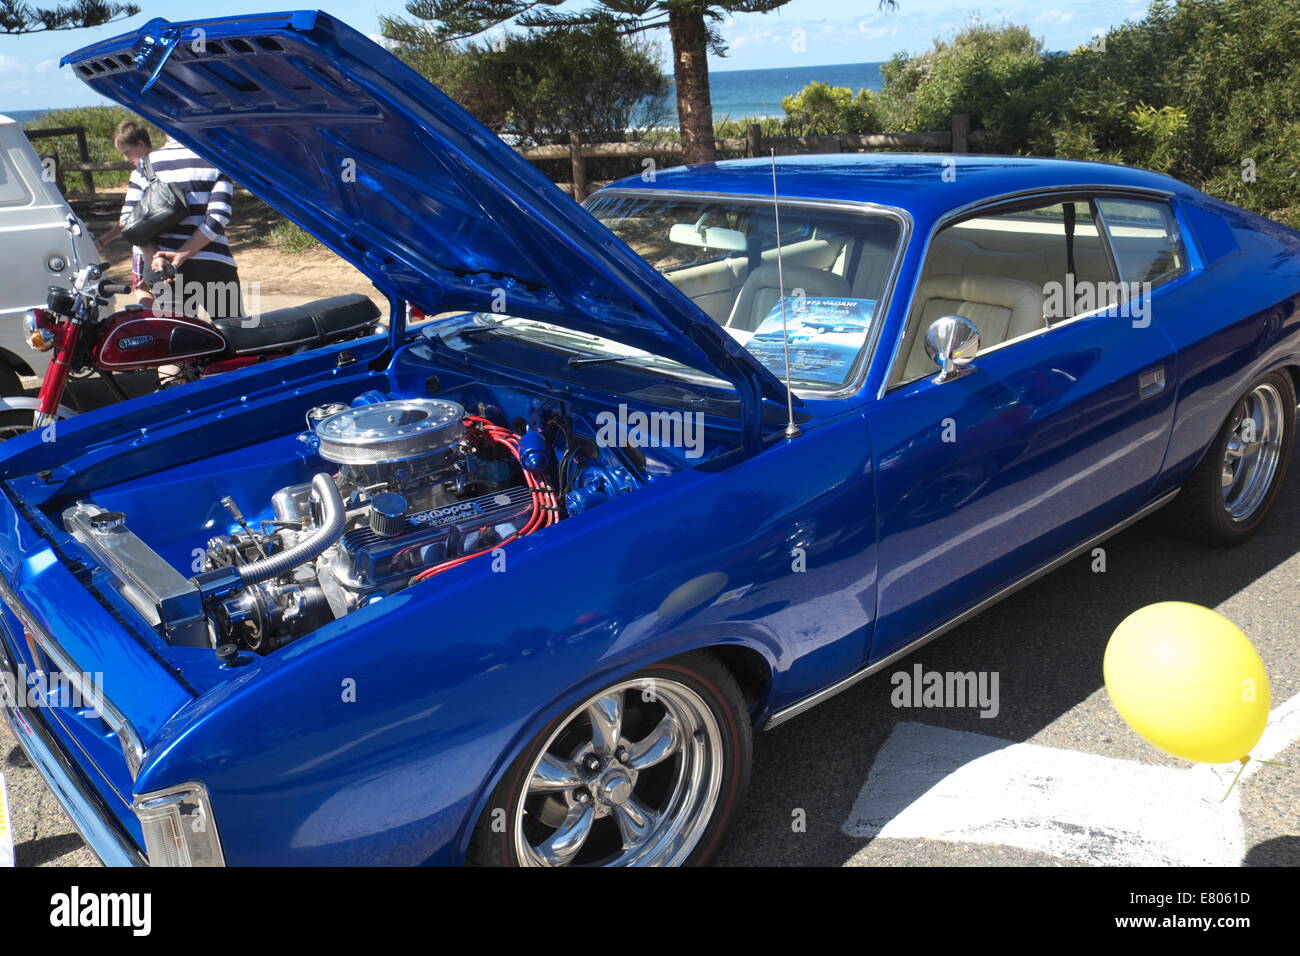 Newport Beach, Sydney, Australia. 27th Sep, 2014. Classic cars on display at Sydney's Newport Beach. Here a 1973 valiant charger. Credit:  martin berry/Alamy Live News Stock Photo